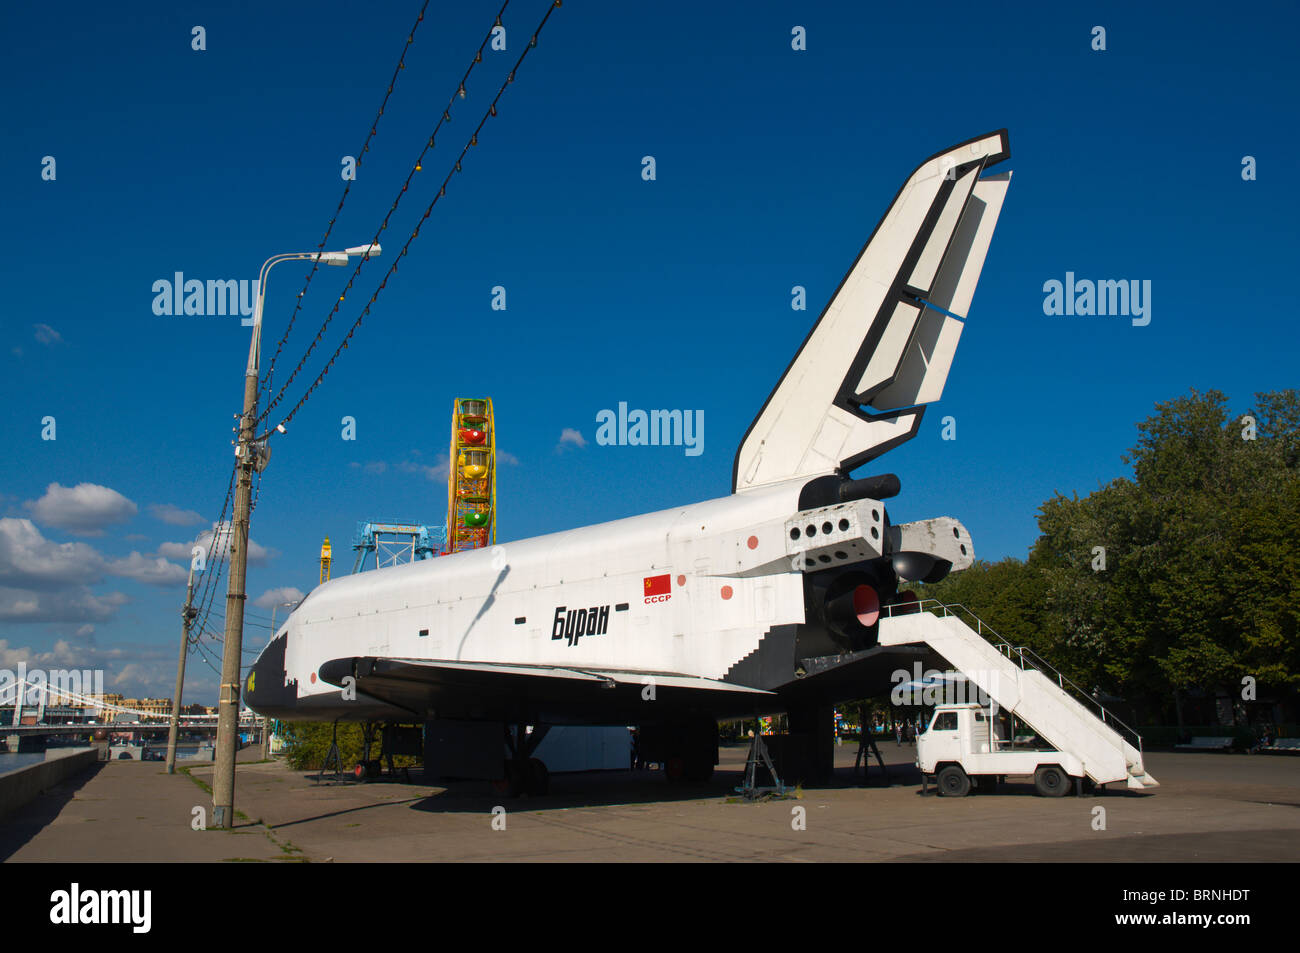 Buran spacecraft program test shuttle (now removed) at Gorky Park central Moscow Russia Europe Stock Photo